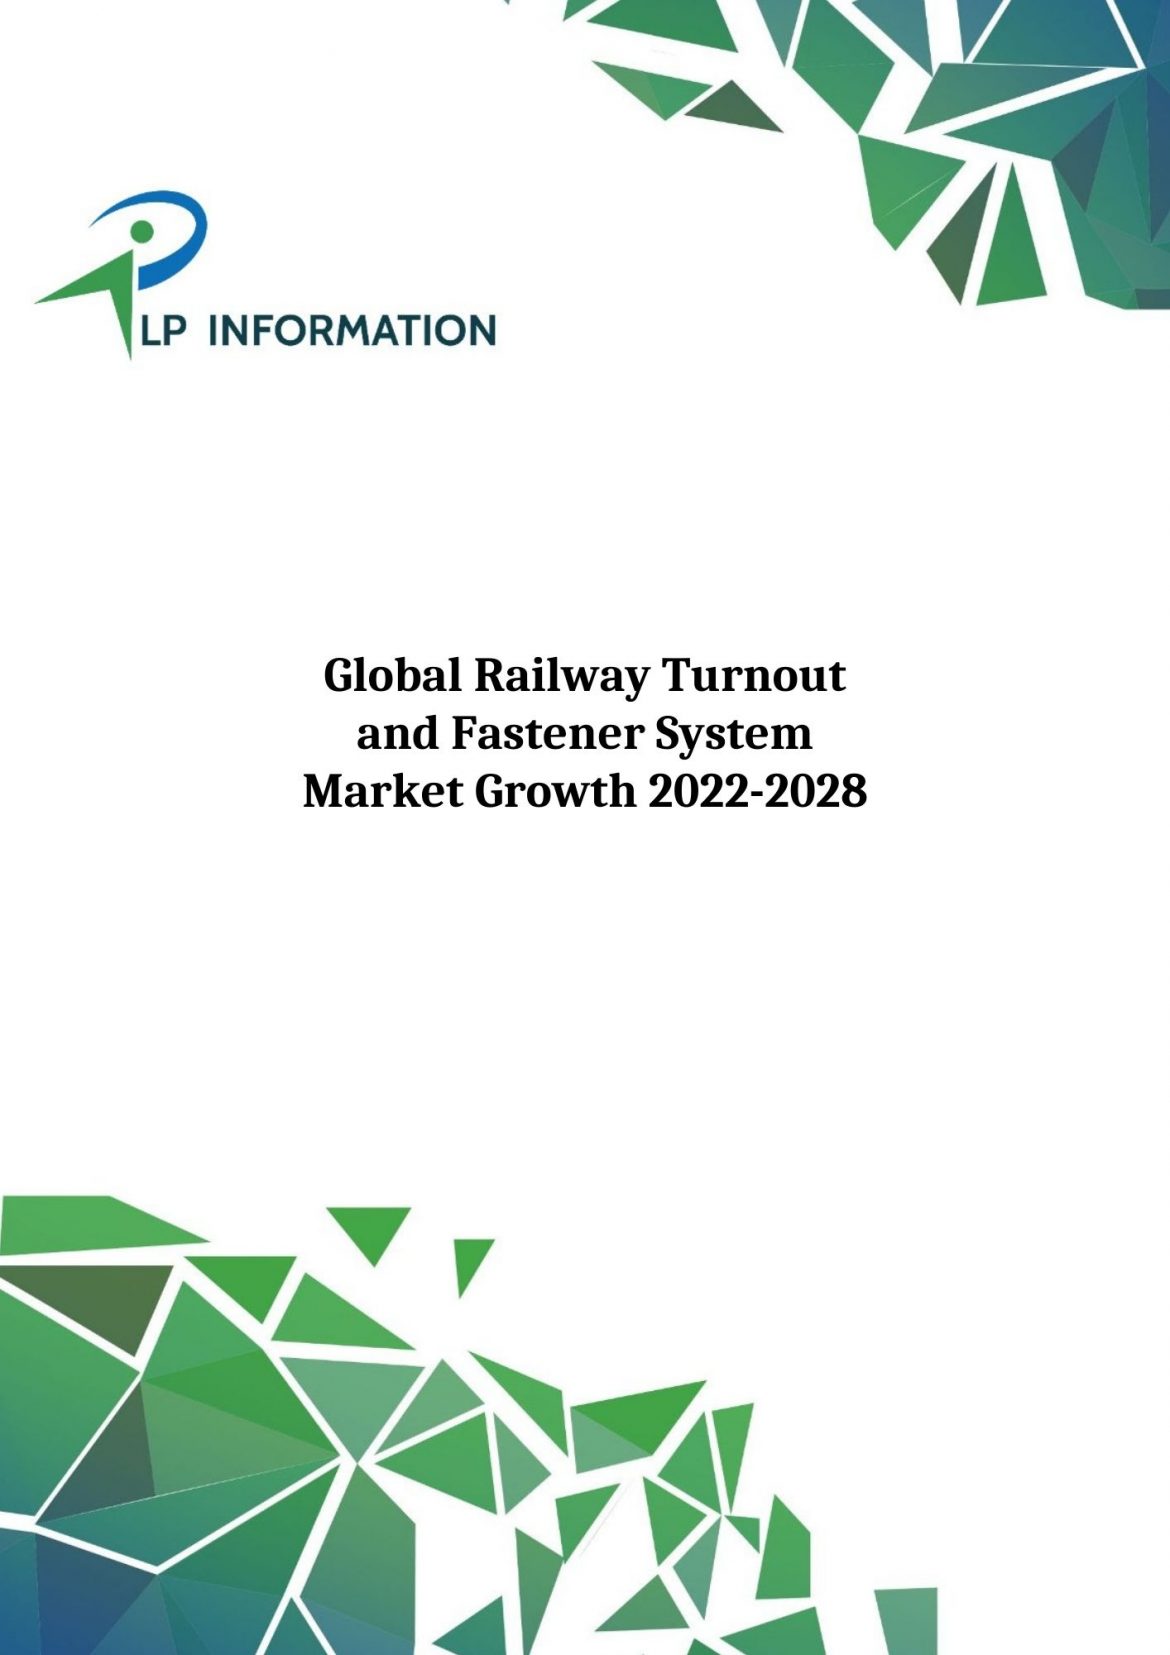 Global Railway Turnout and Fastener System Market Growth 2022-2028